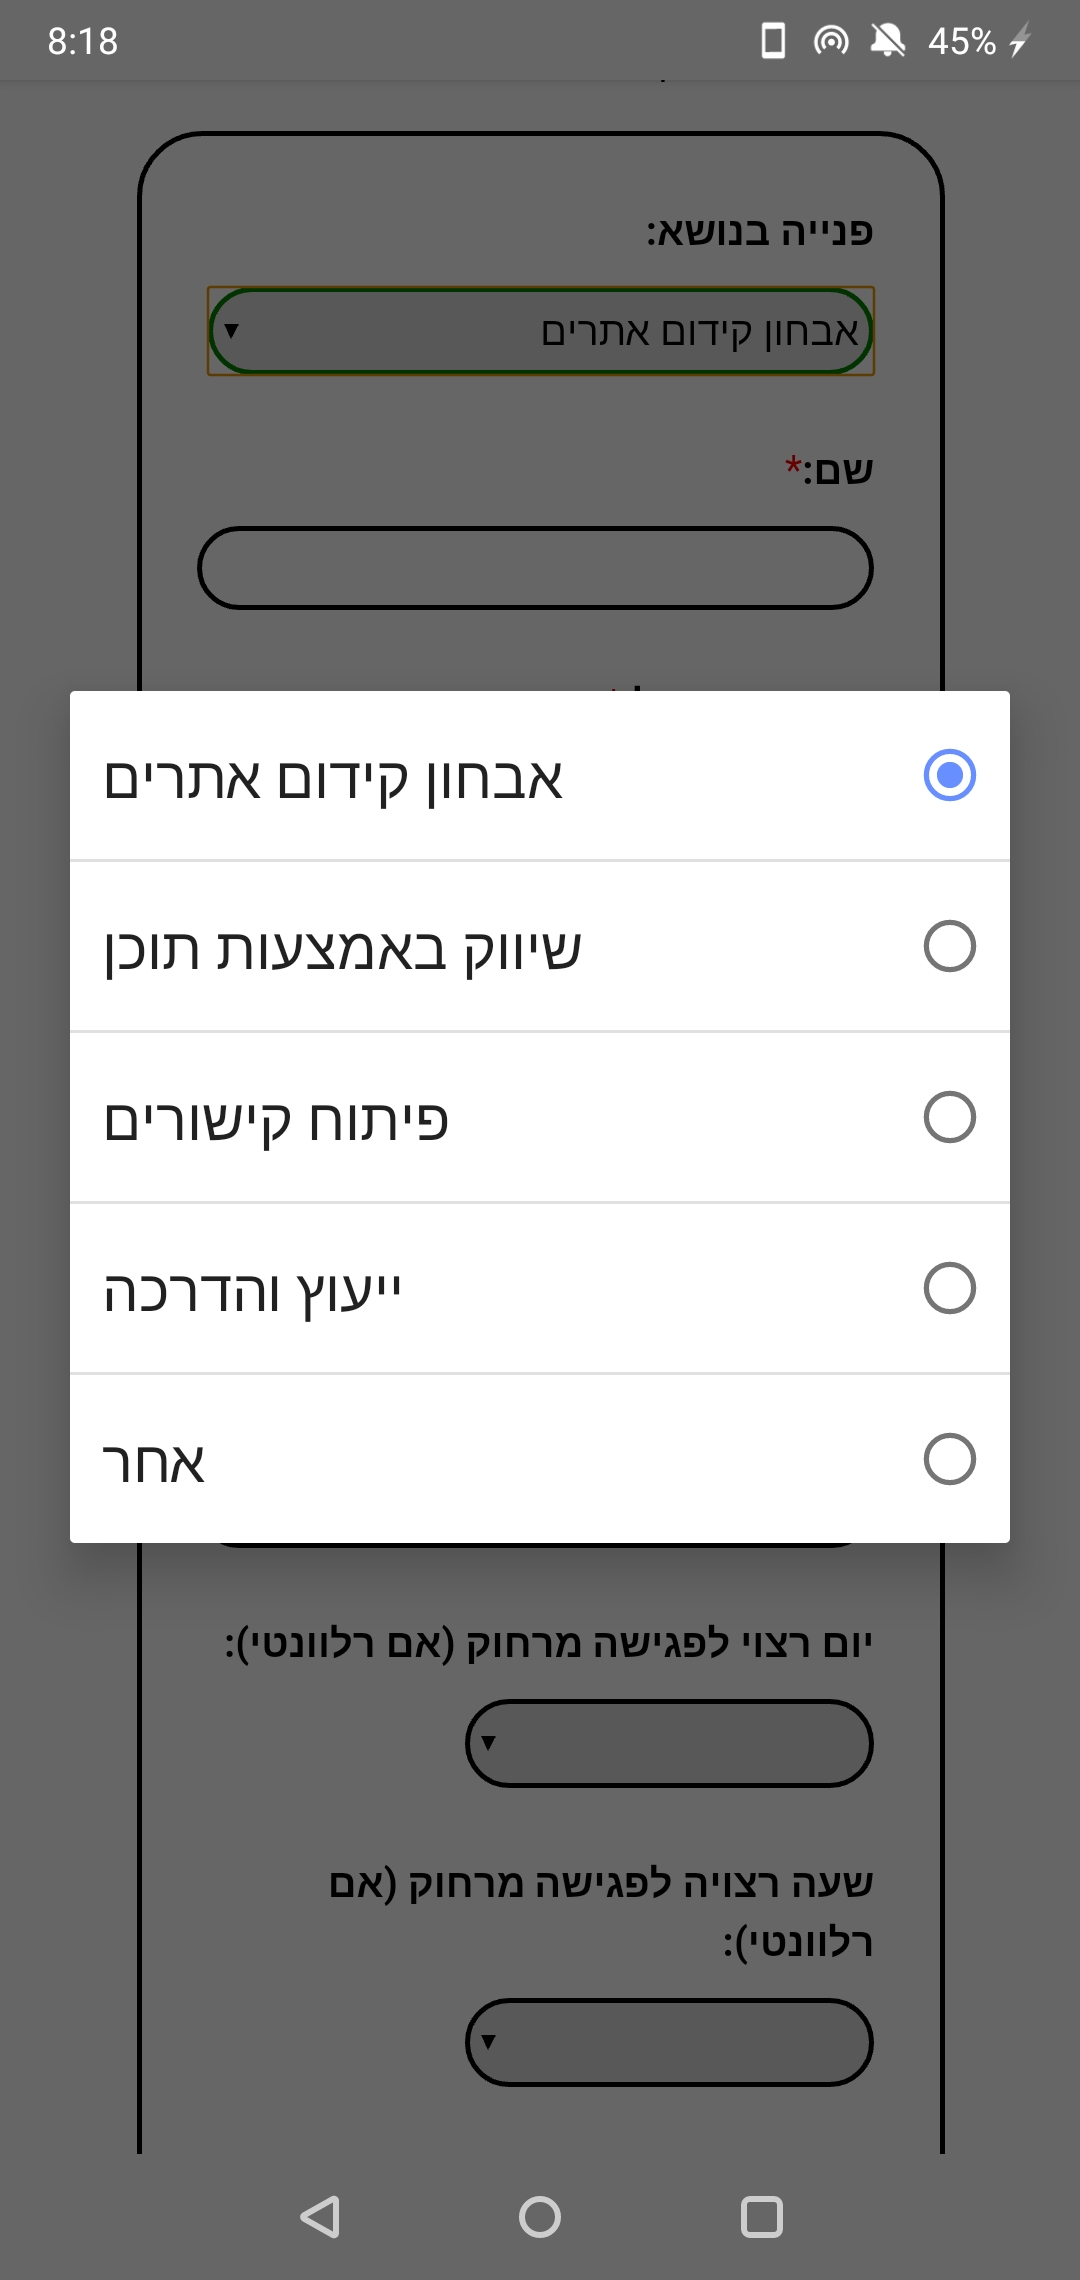 An image in which the odd Left to Right Hebrew is shown ; the select list has five options --- and they are all "juxtaposed" to the left of the select list modal in mobile devices instead to the right of the modal